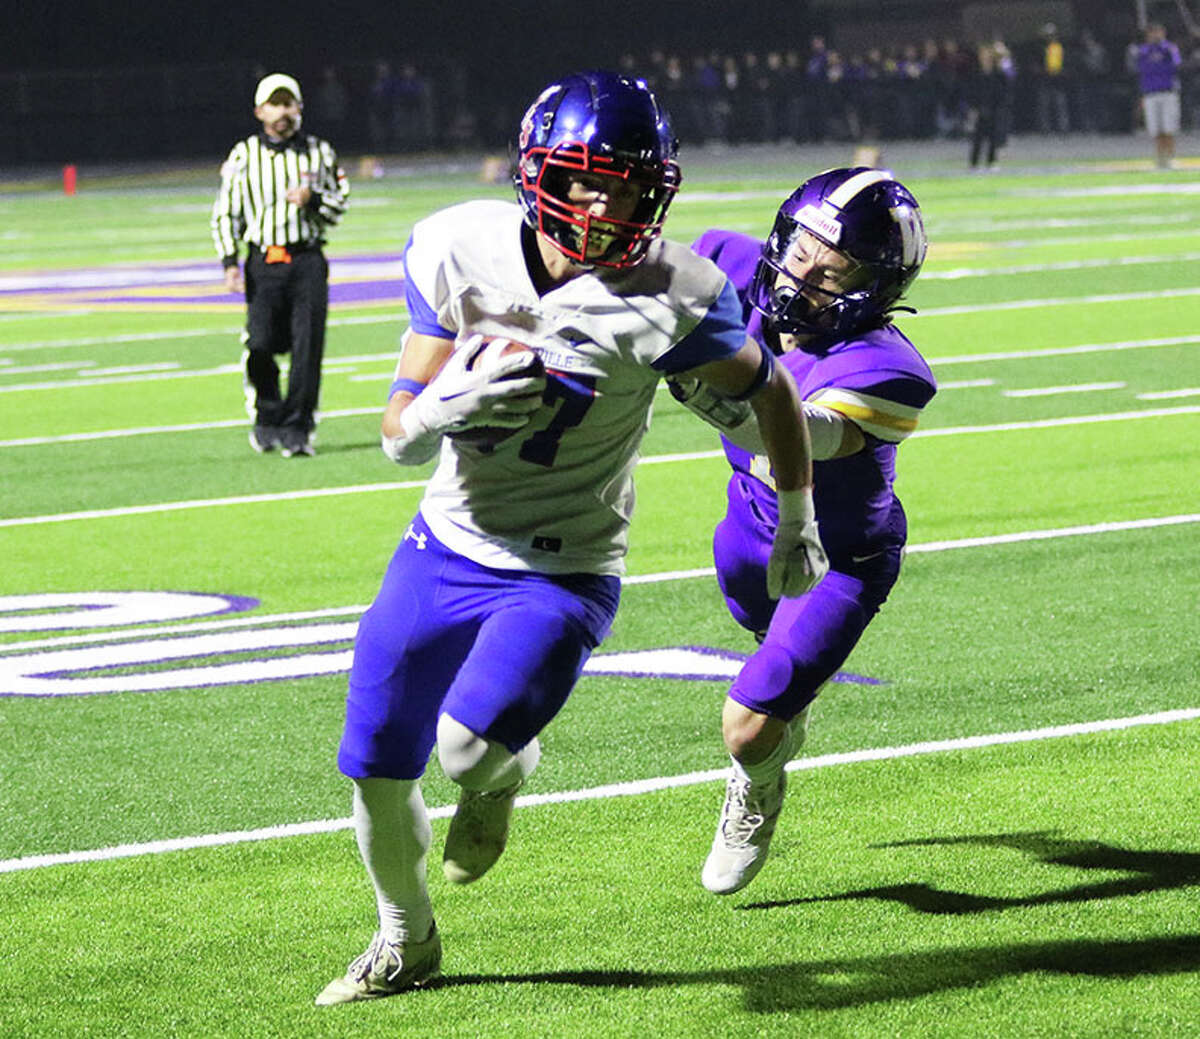 Carlinville's Jack Rouse (left) gets past Williamsville's Nolan Bates to score on a 7-yard TD run in the first quarter in a Class 3A first-round playoff game Friday night at Williamsville.